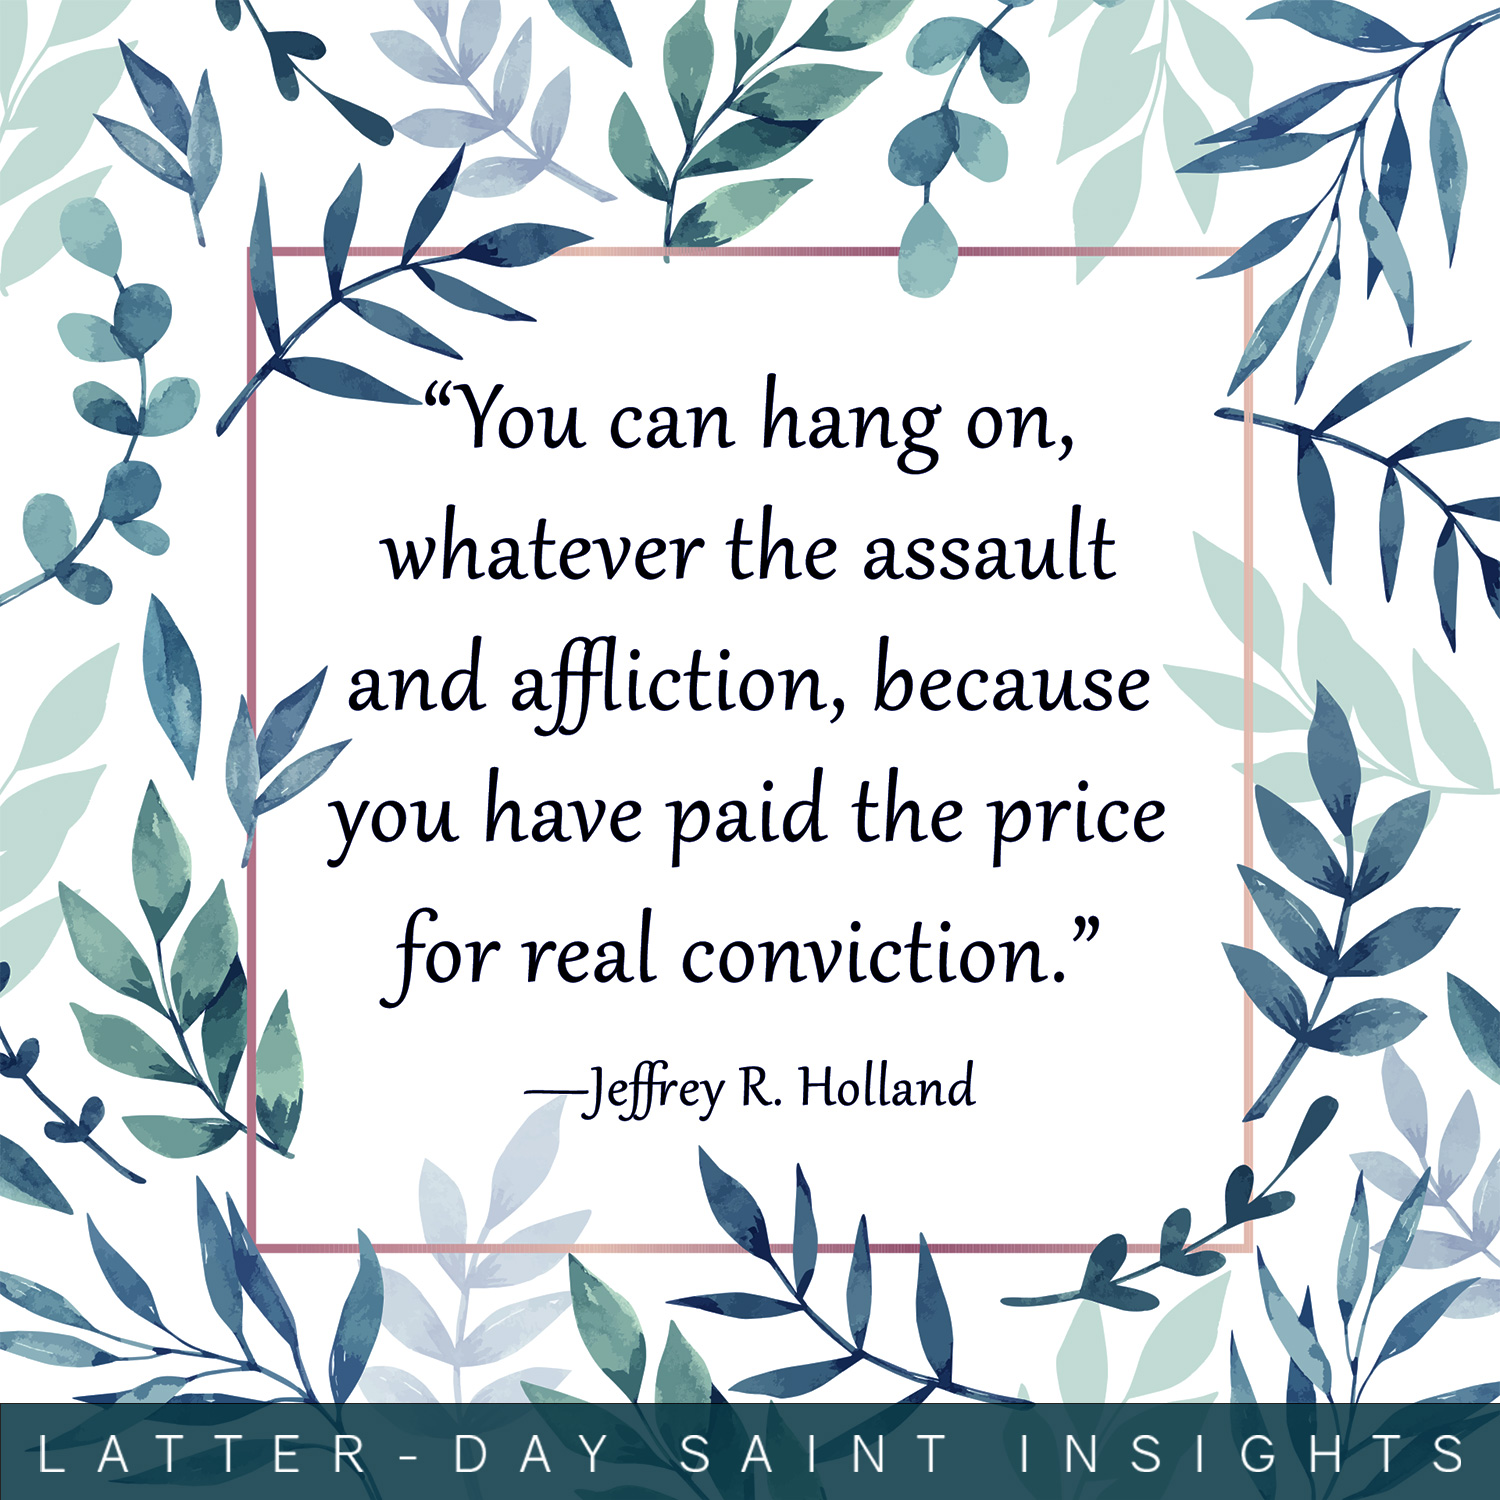 “You can hang on, whatever the assault and affliction, because you have paid the price for real conviction.” —Jeffrey R. Holland